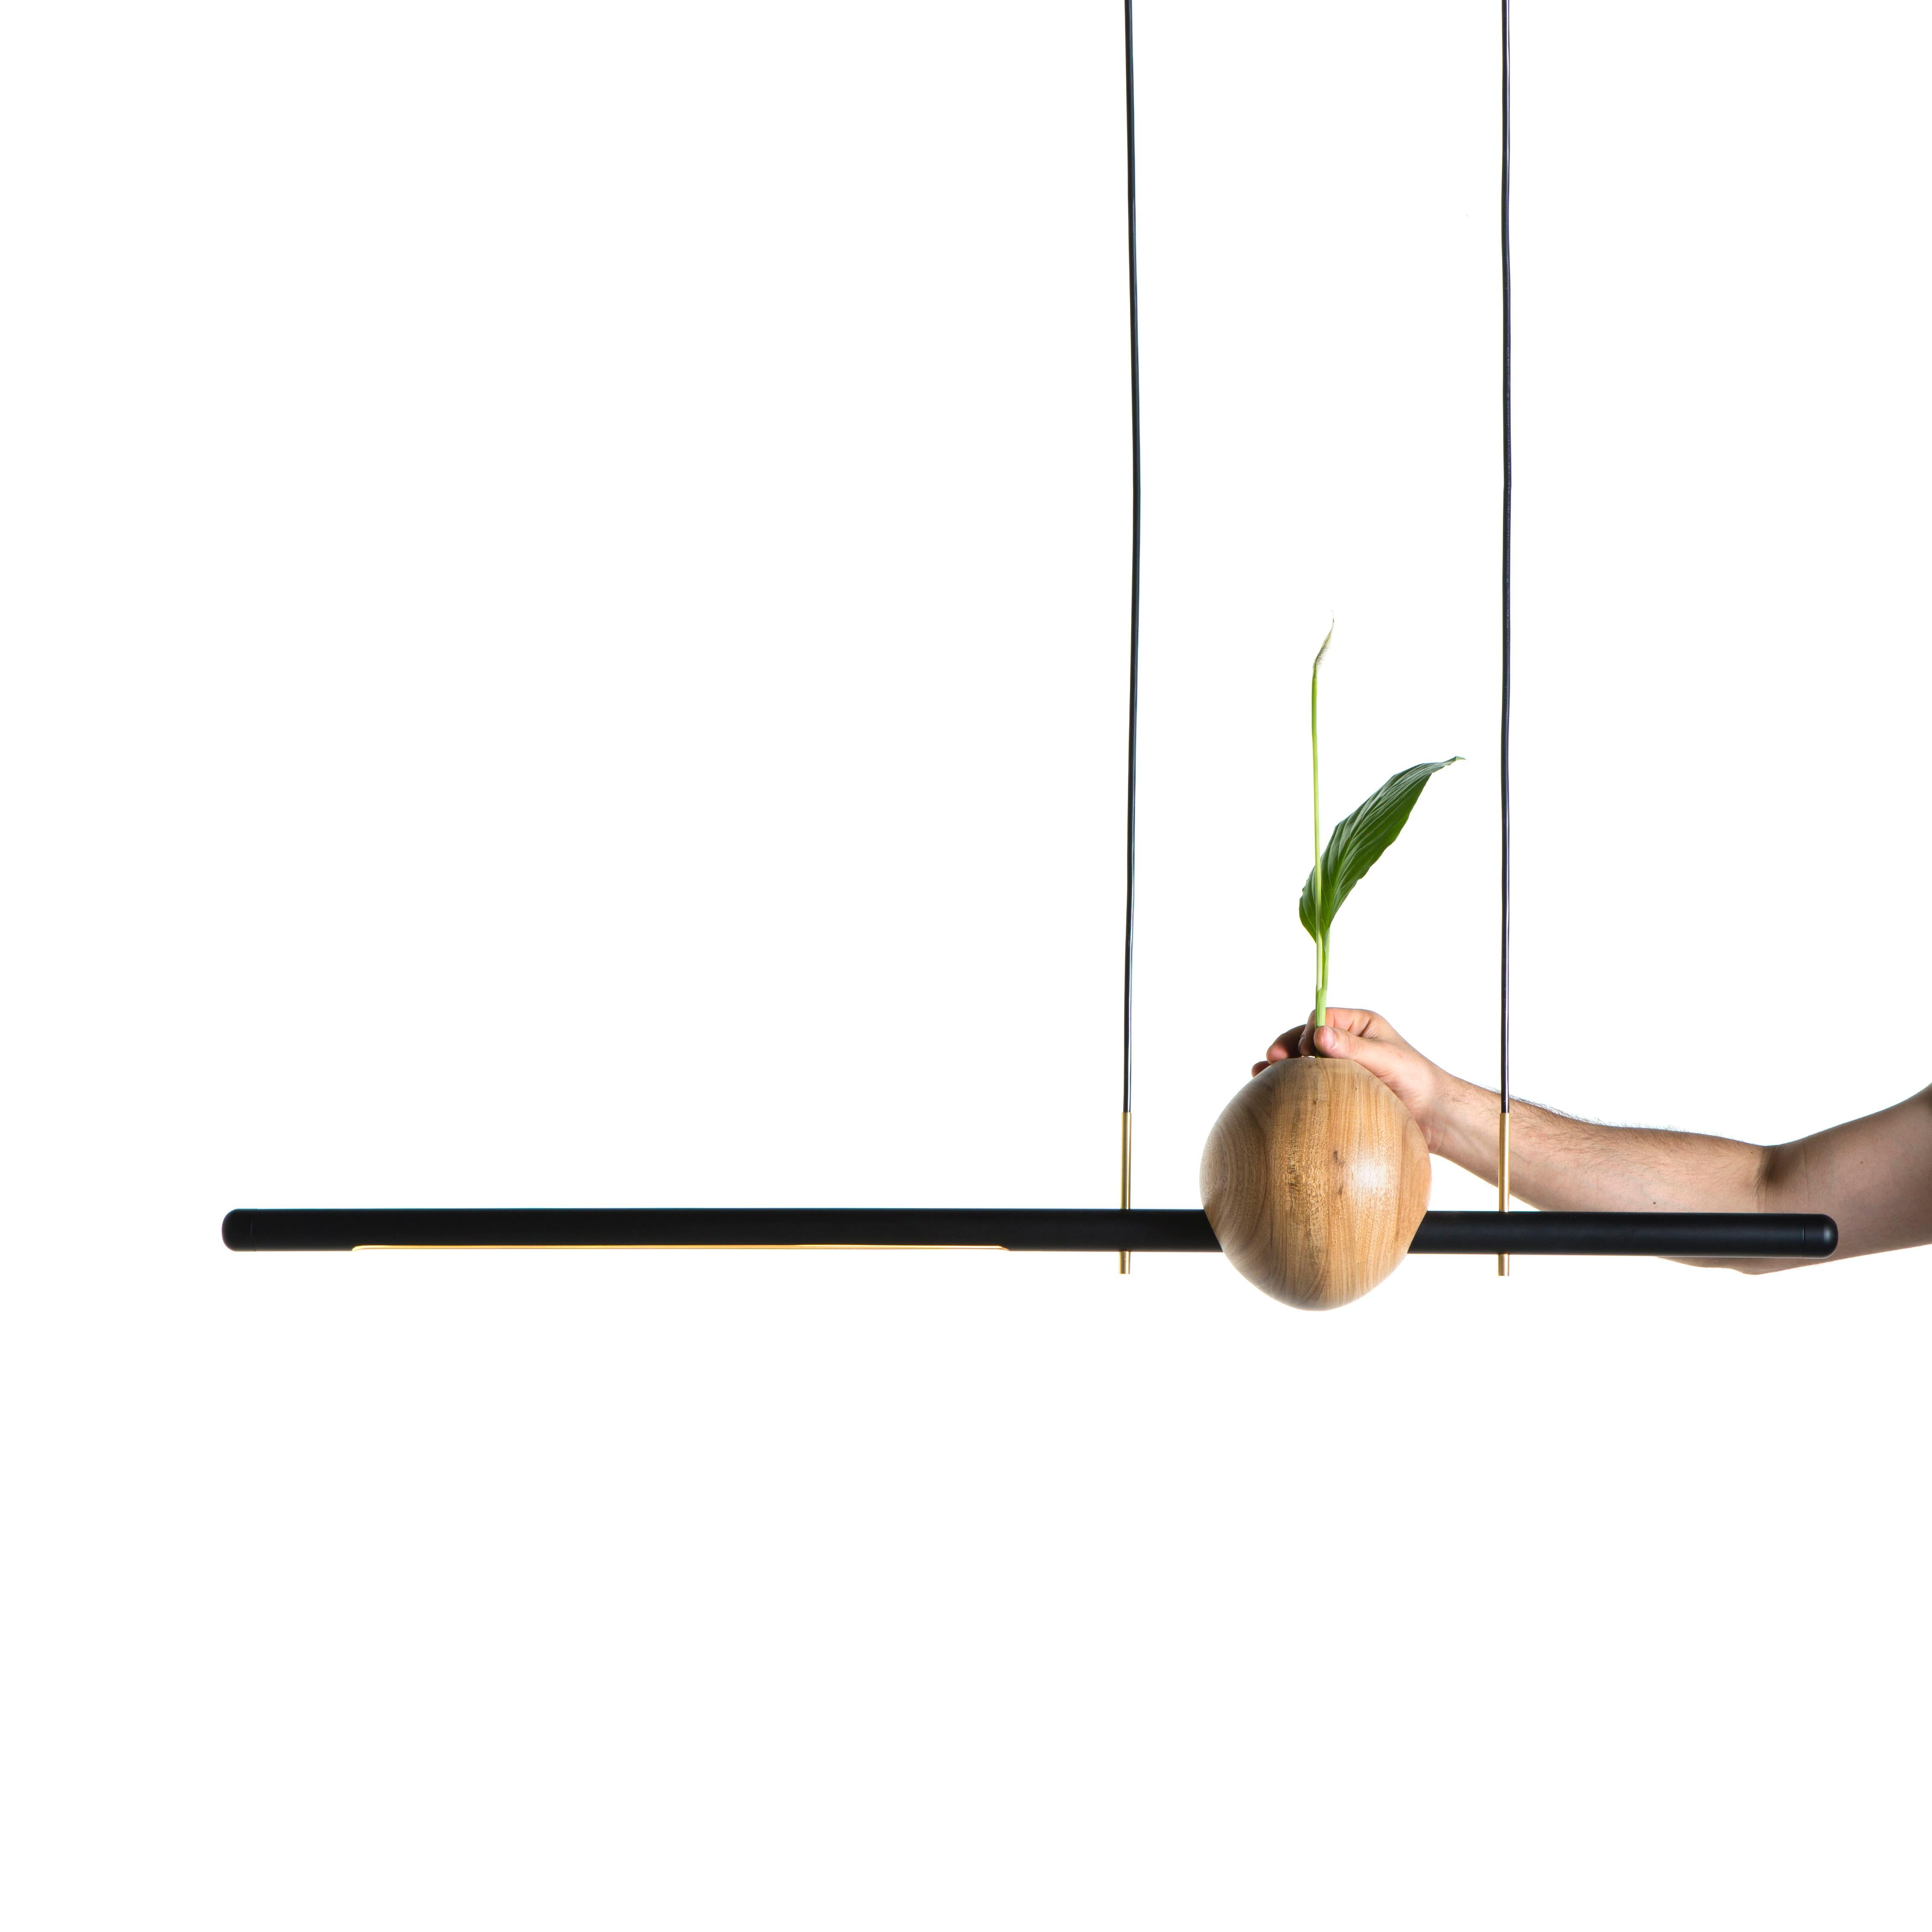 The pendant lamp Ninho is handcrafted in solid Brazilian hardwood Freijó
The piece represents the Brazilian contemporary design.
- LED 10w
- 3.000 K - color temperature.
- Inside the turned piece in wood there is a glass cylinder, allowing to